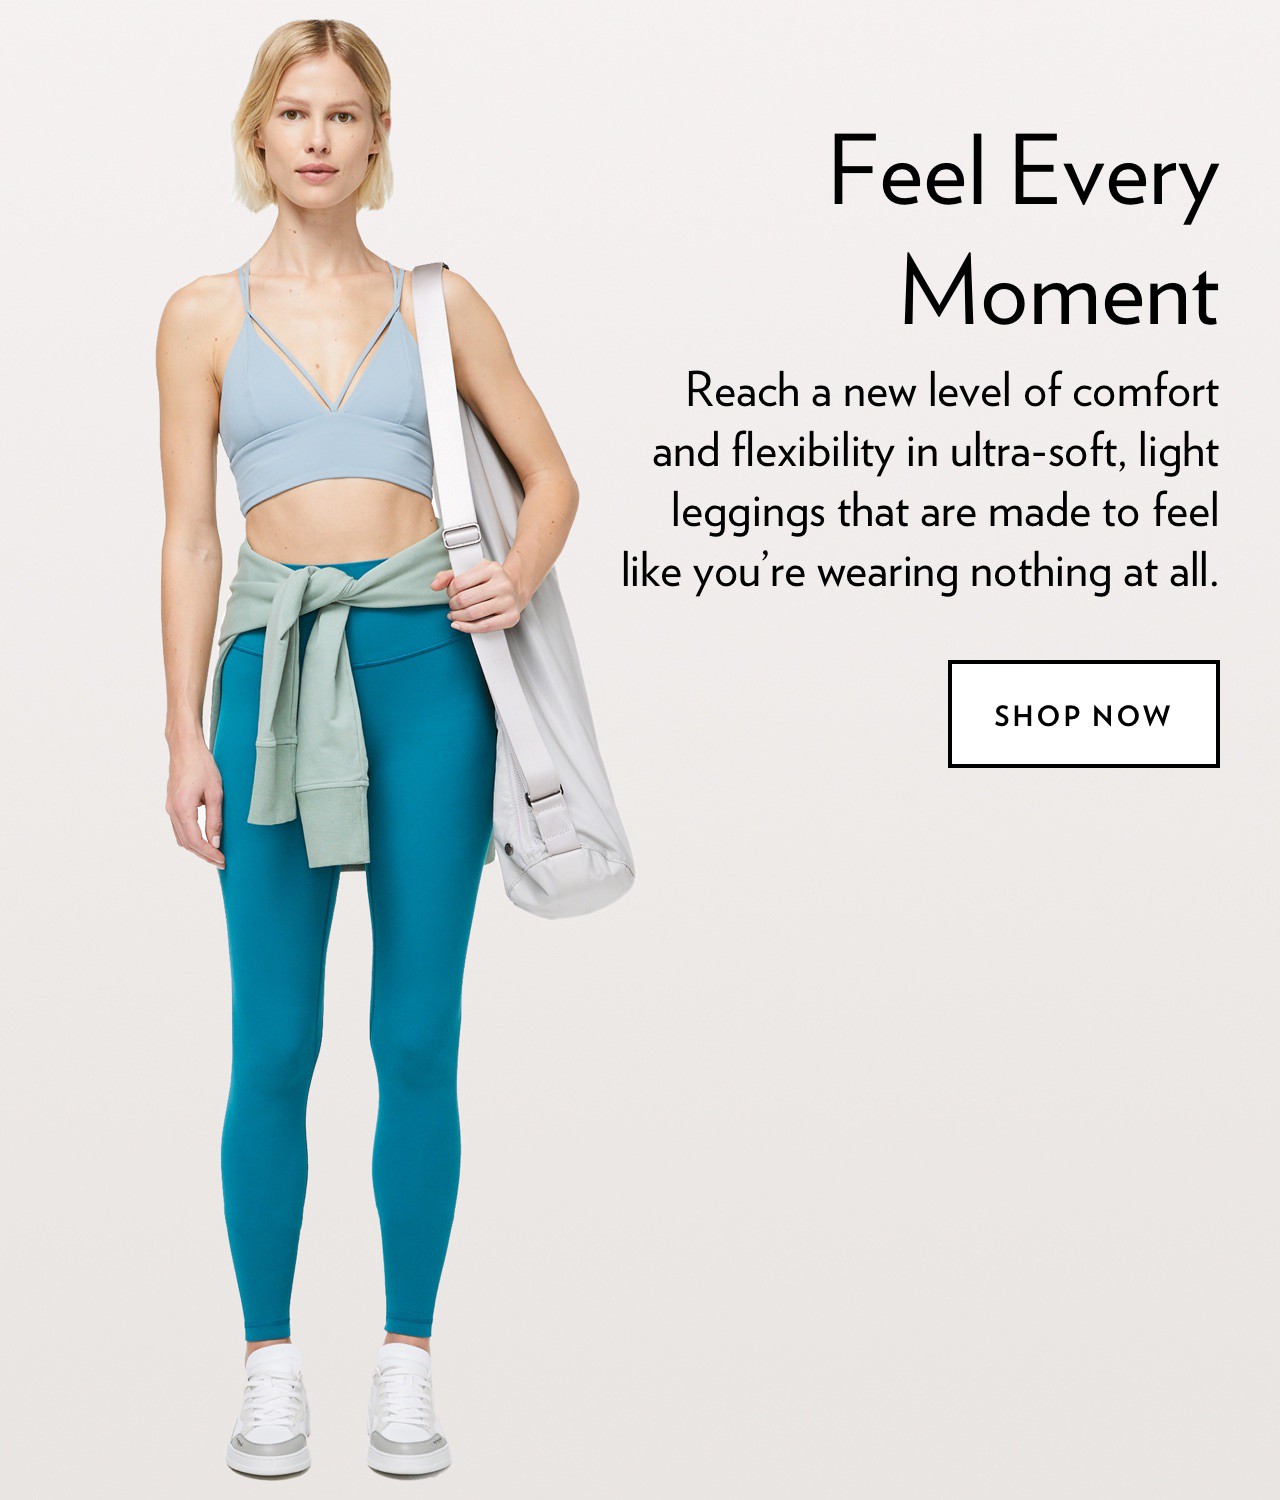 Feel Every Moment - SHOP NOW